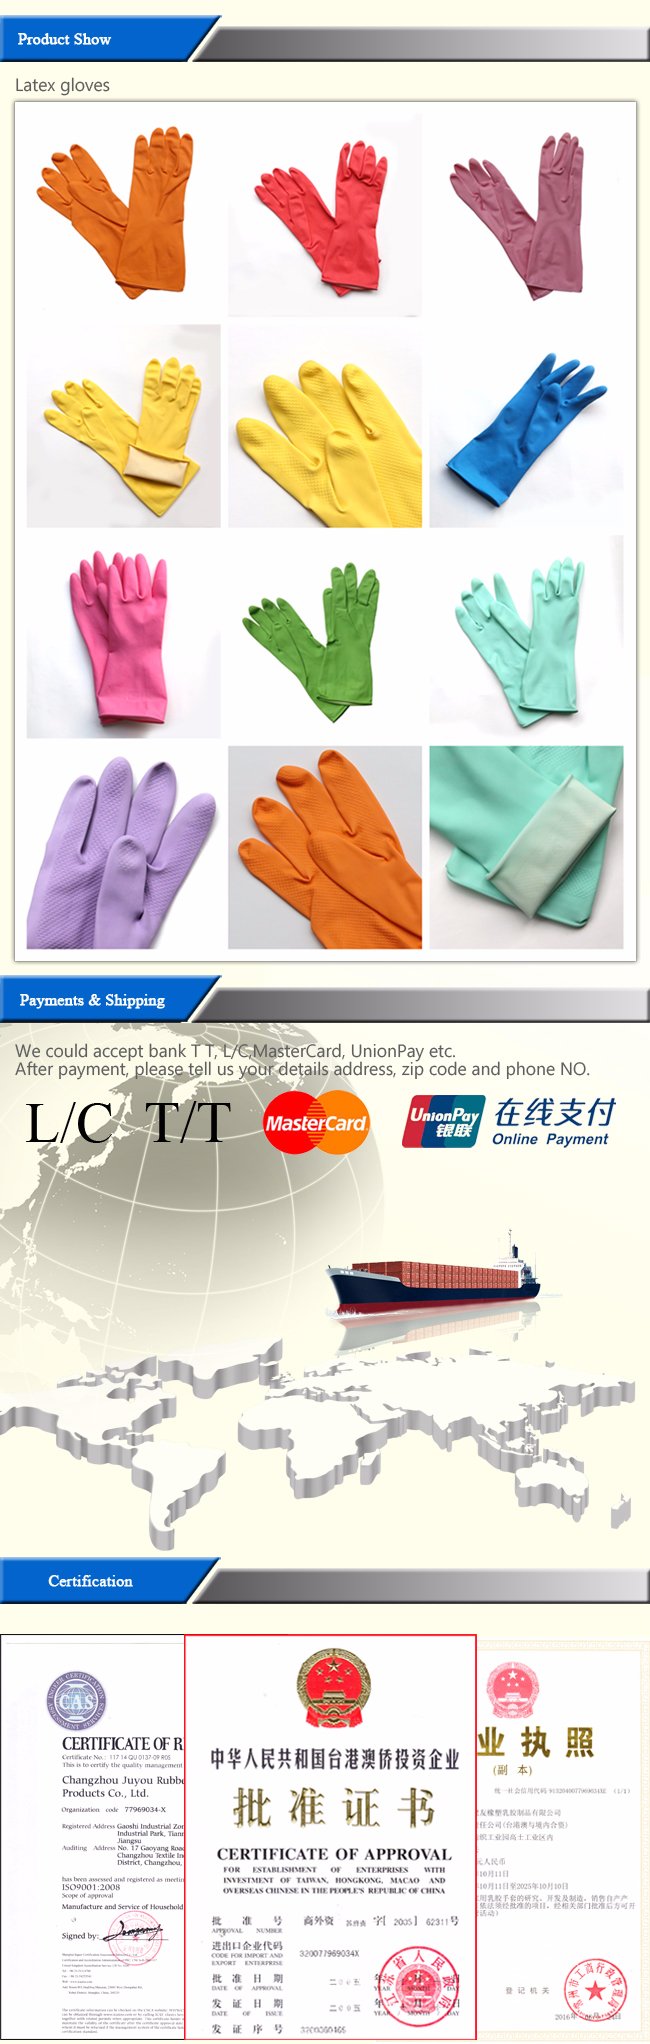 Protective Household Working Latex Waterproof Gloves with Good Quality